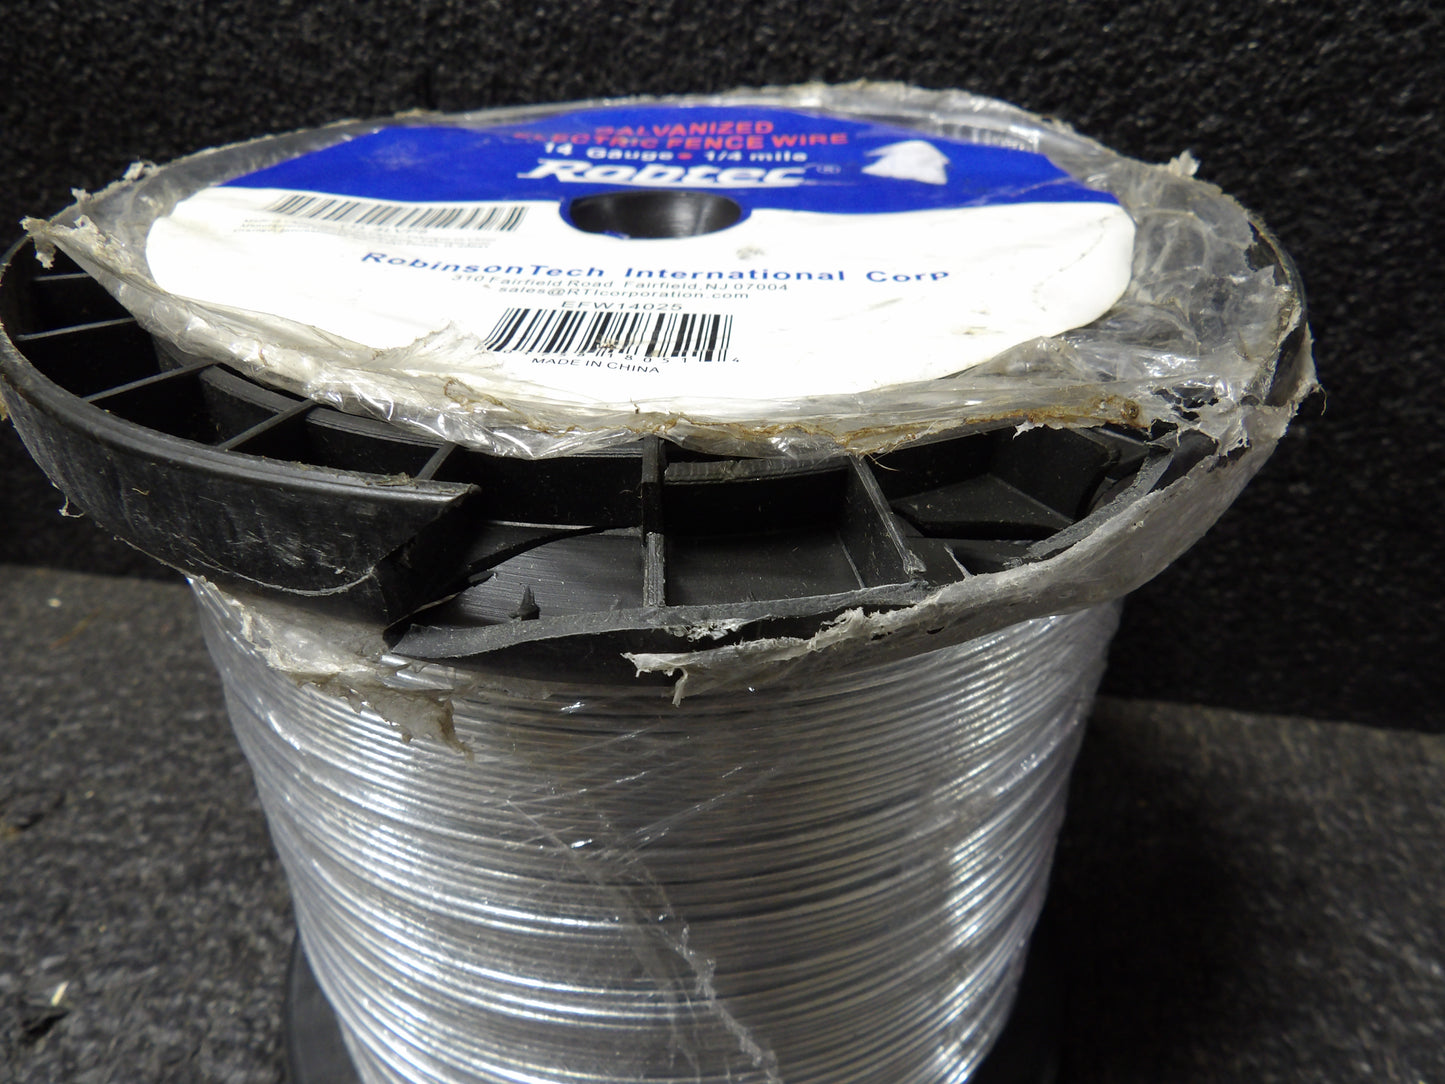 Robtec Galvanized Electric Fence Wire: 14 Gauge, 1,320 ft Lg, 1/4 Mile (CR00867-WTA27)